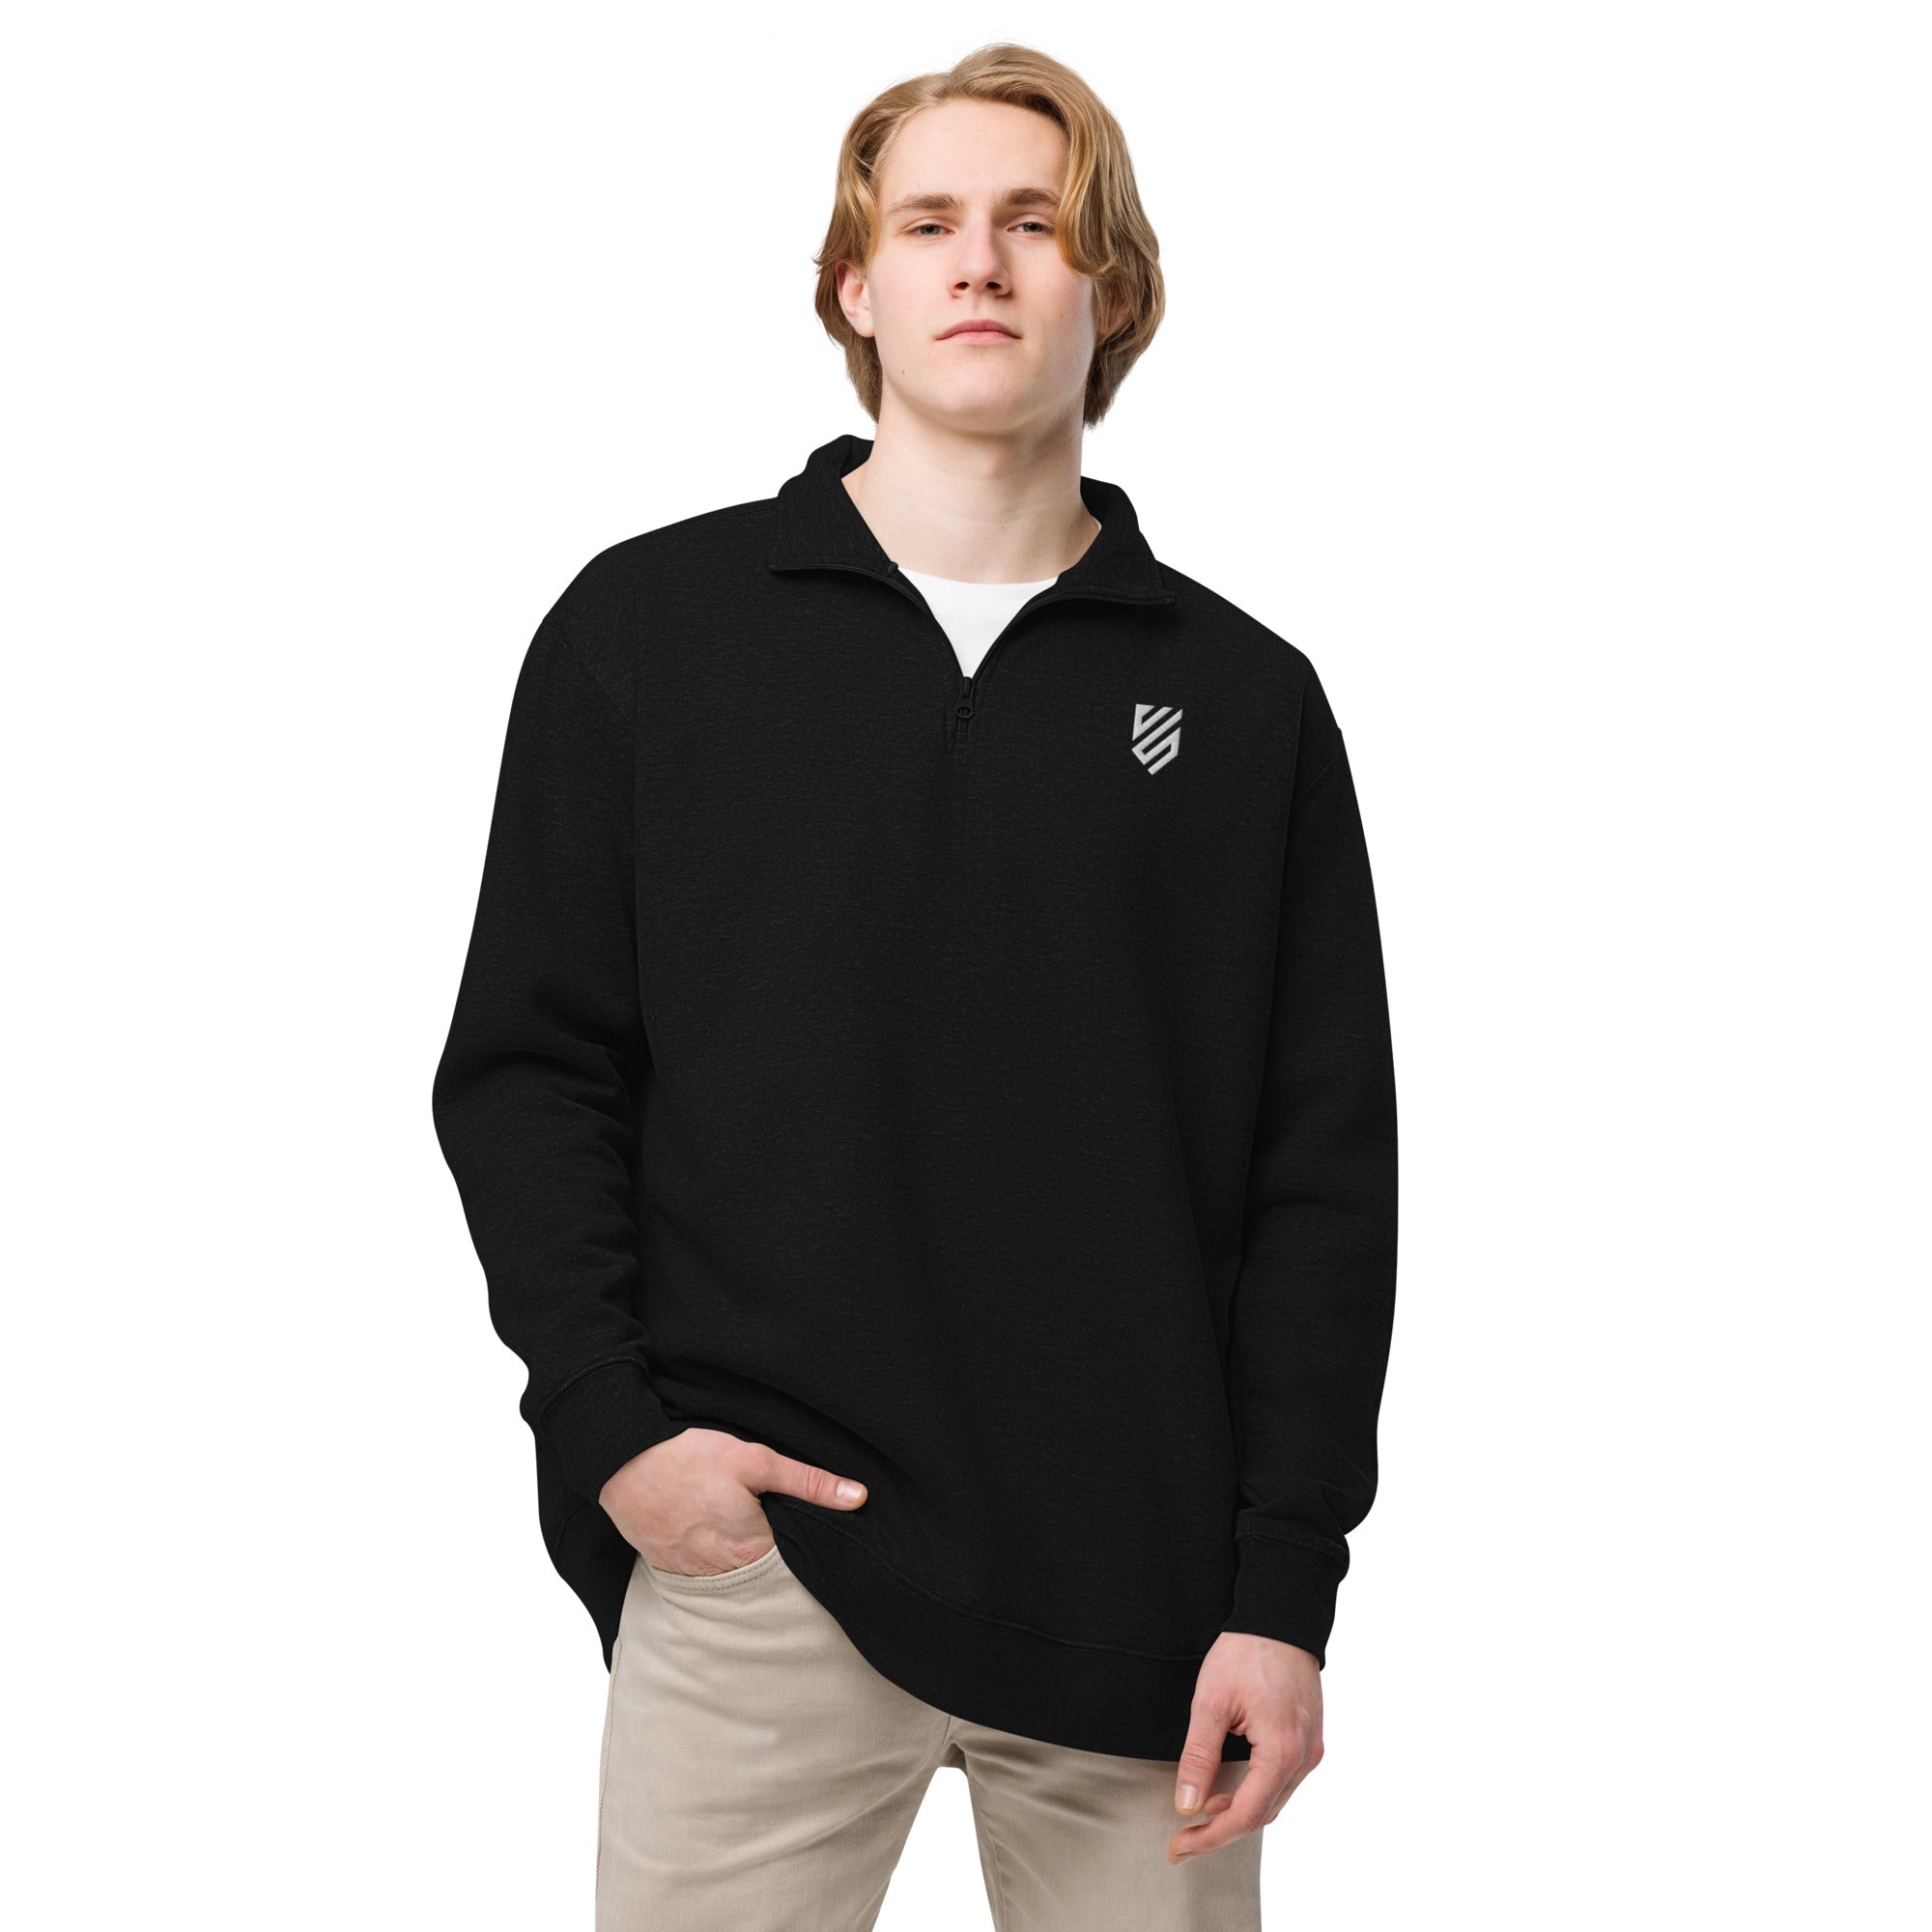 Unisex fleece pullover Embroidered